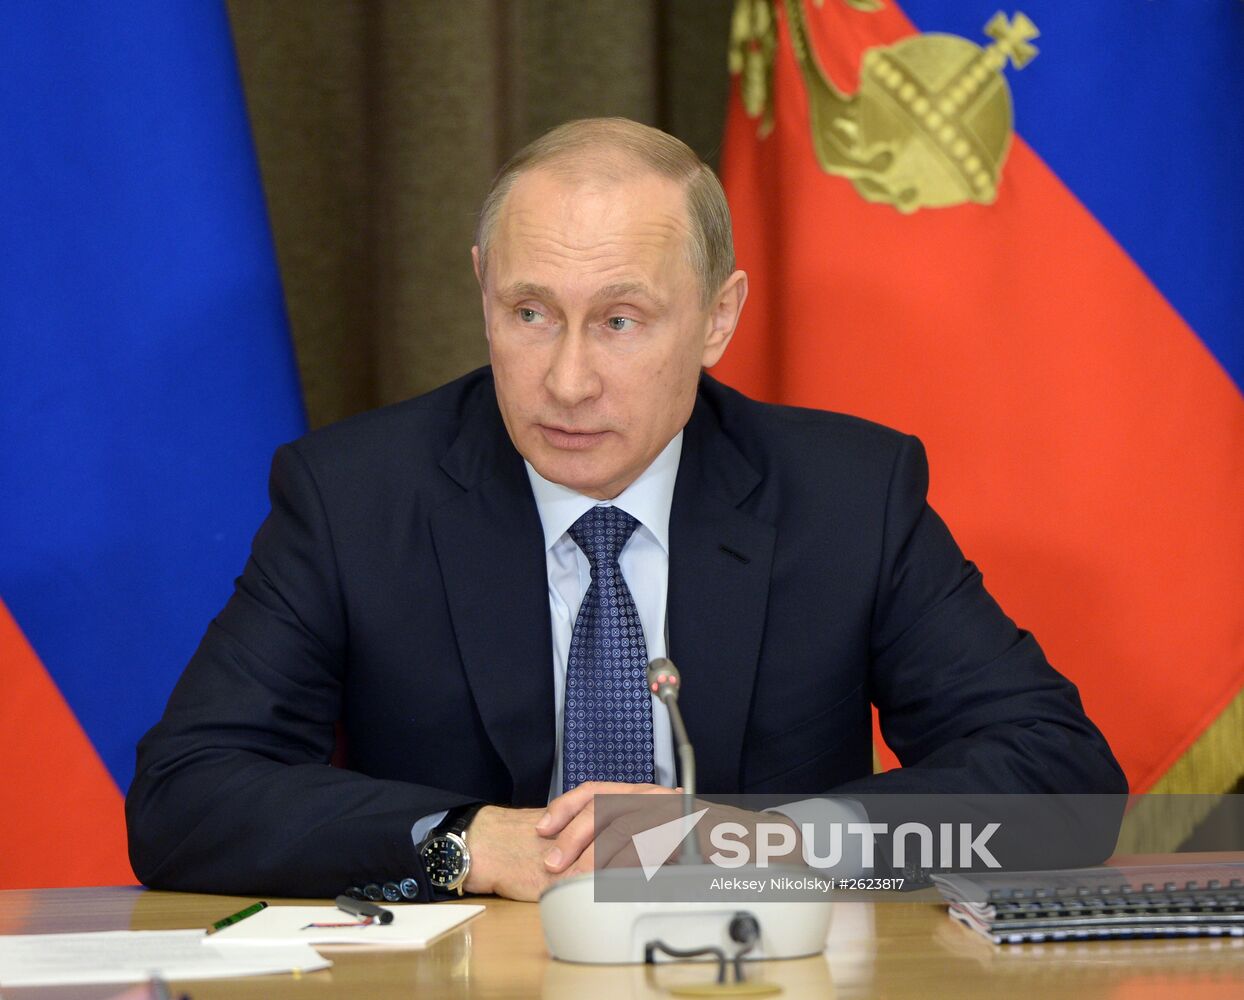 Russian President Vladimir Putin chairs meeting with senior Defense Ministry officials and defense-industry representatives